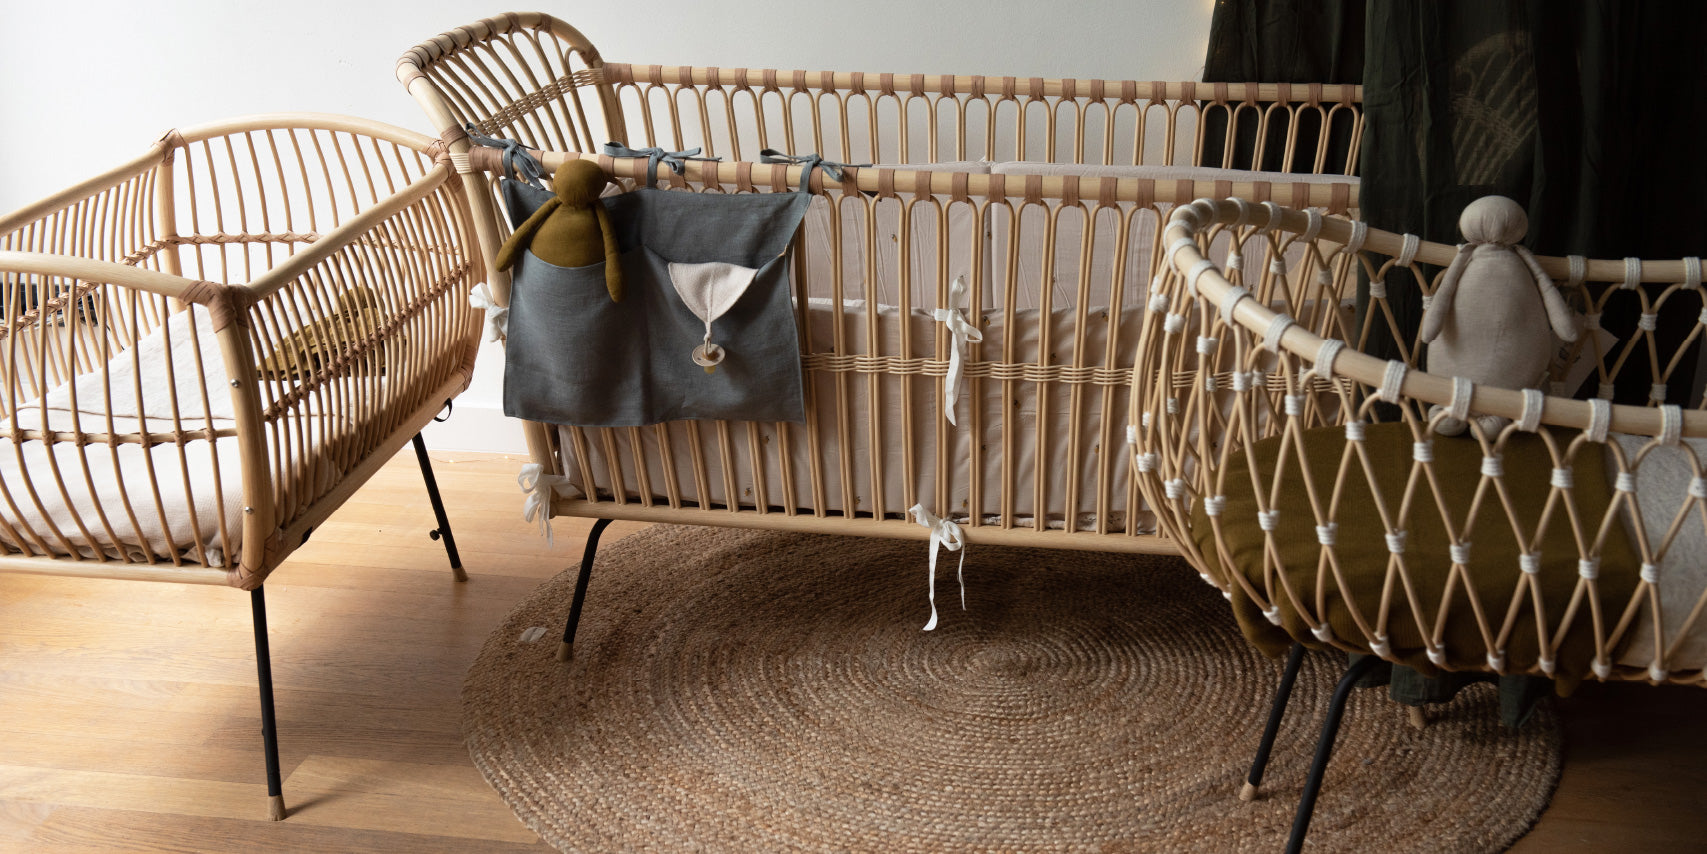 Bermbach handcrafted cribs and cots